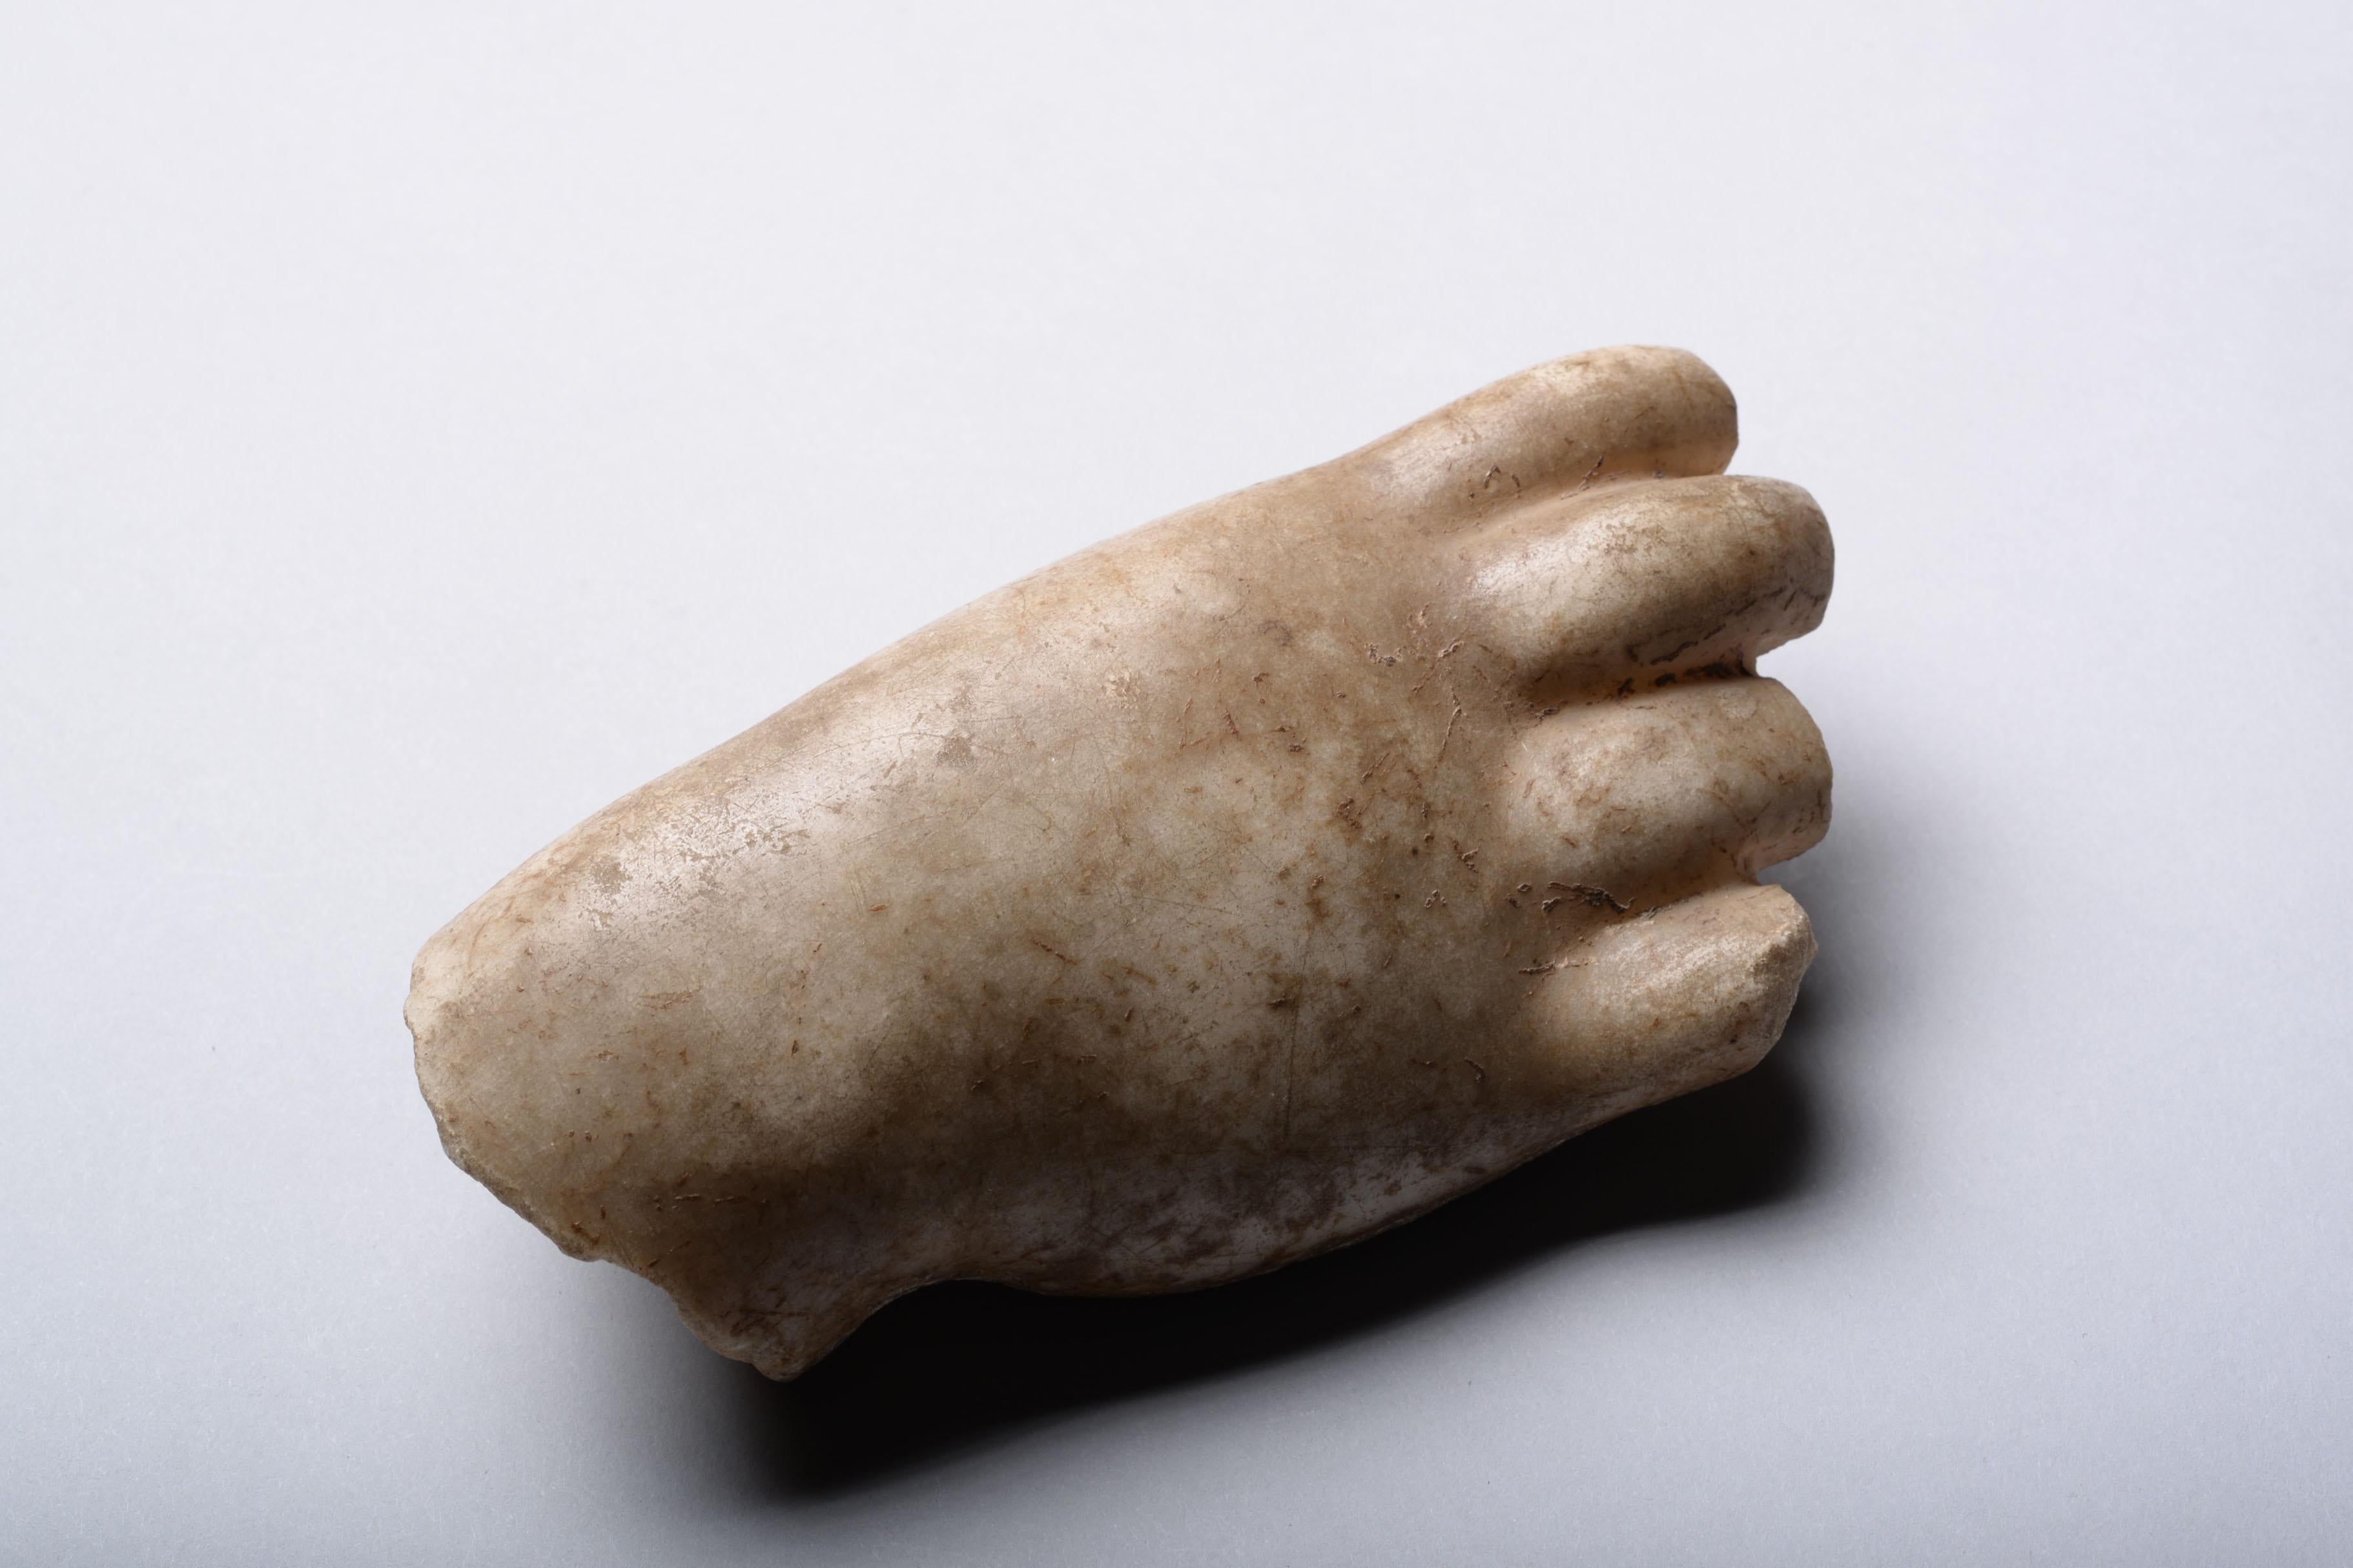 Roman Marble Fragment of a Hand - Sculpture by Unknown